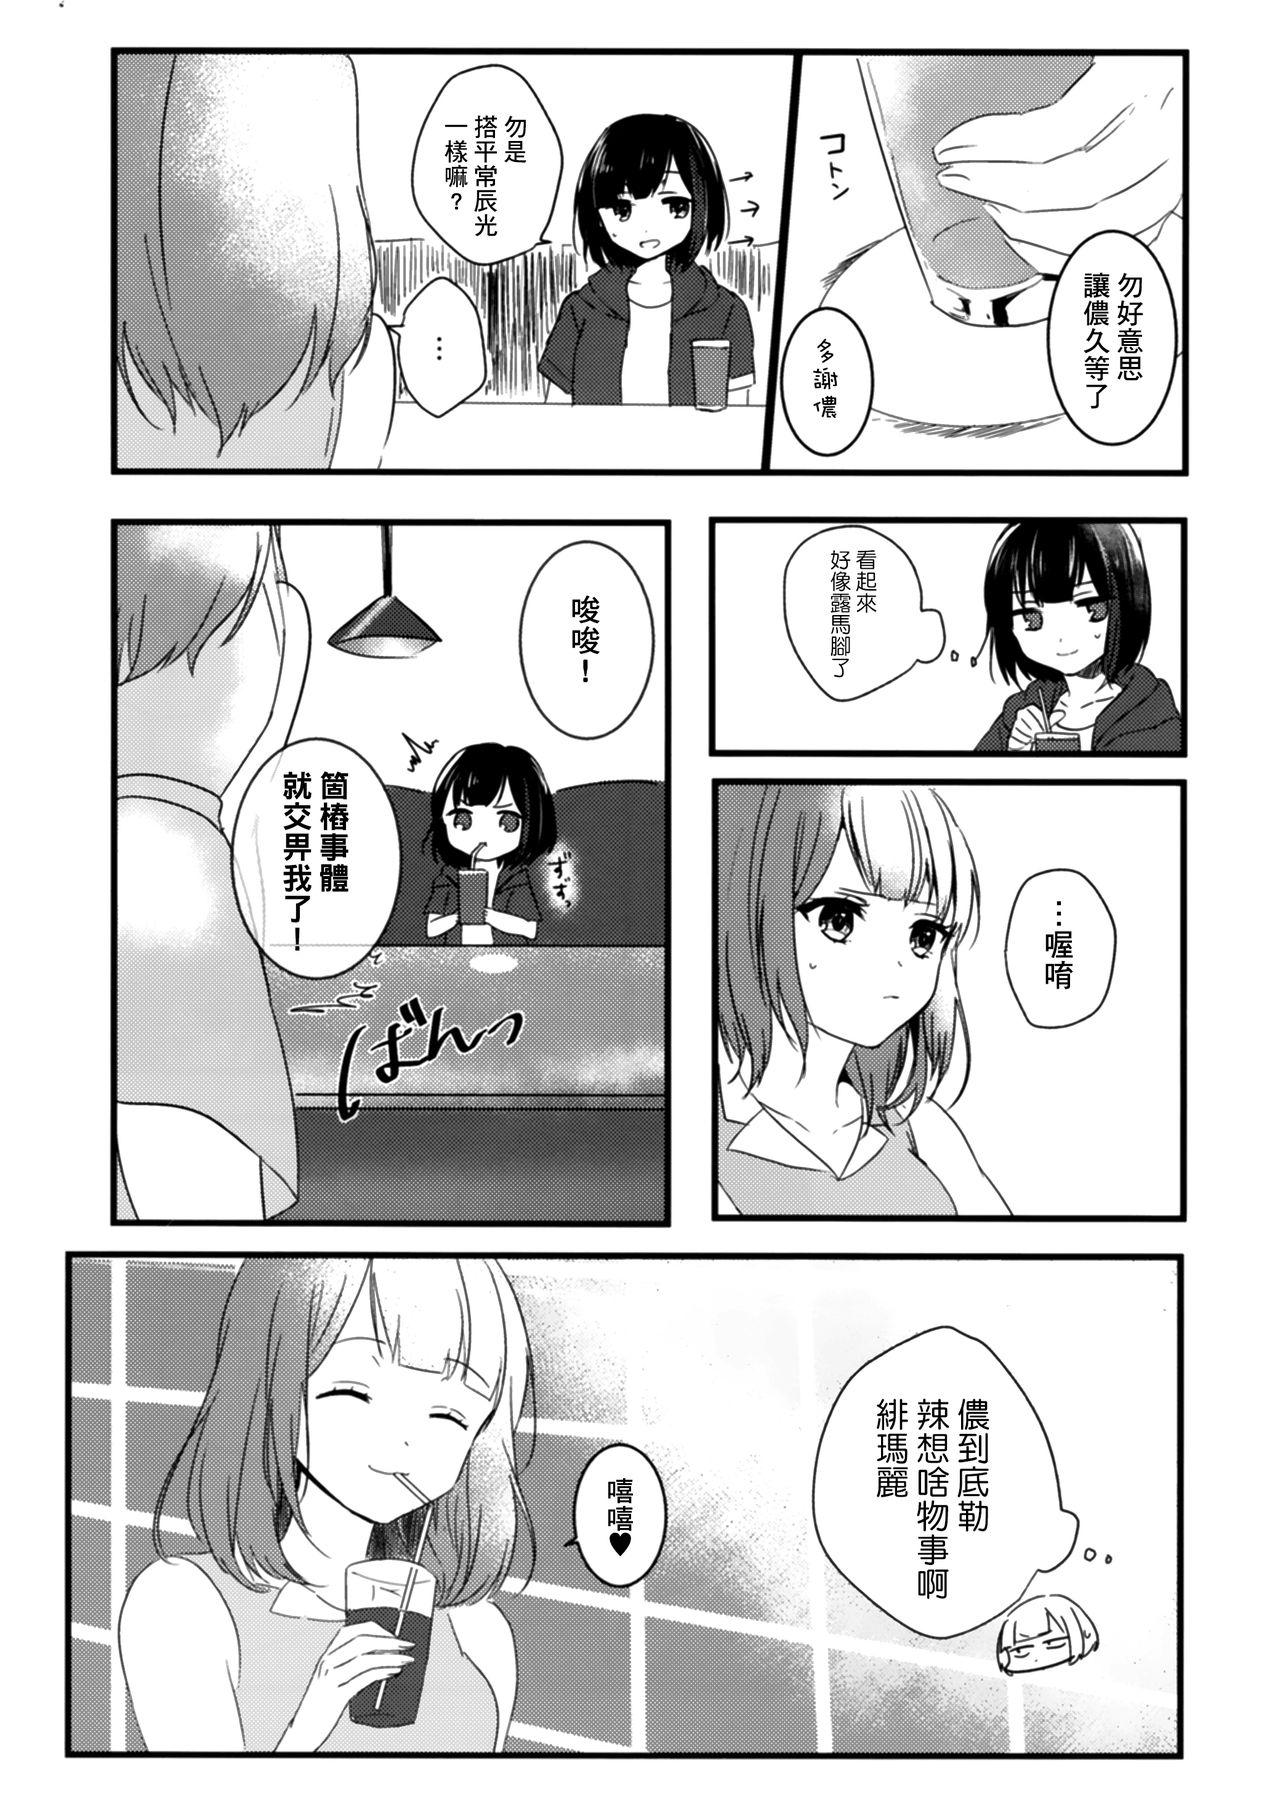 Scandal Secret relationship - Bang dream Squirting - Page 8